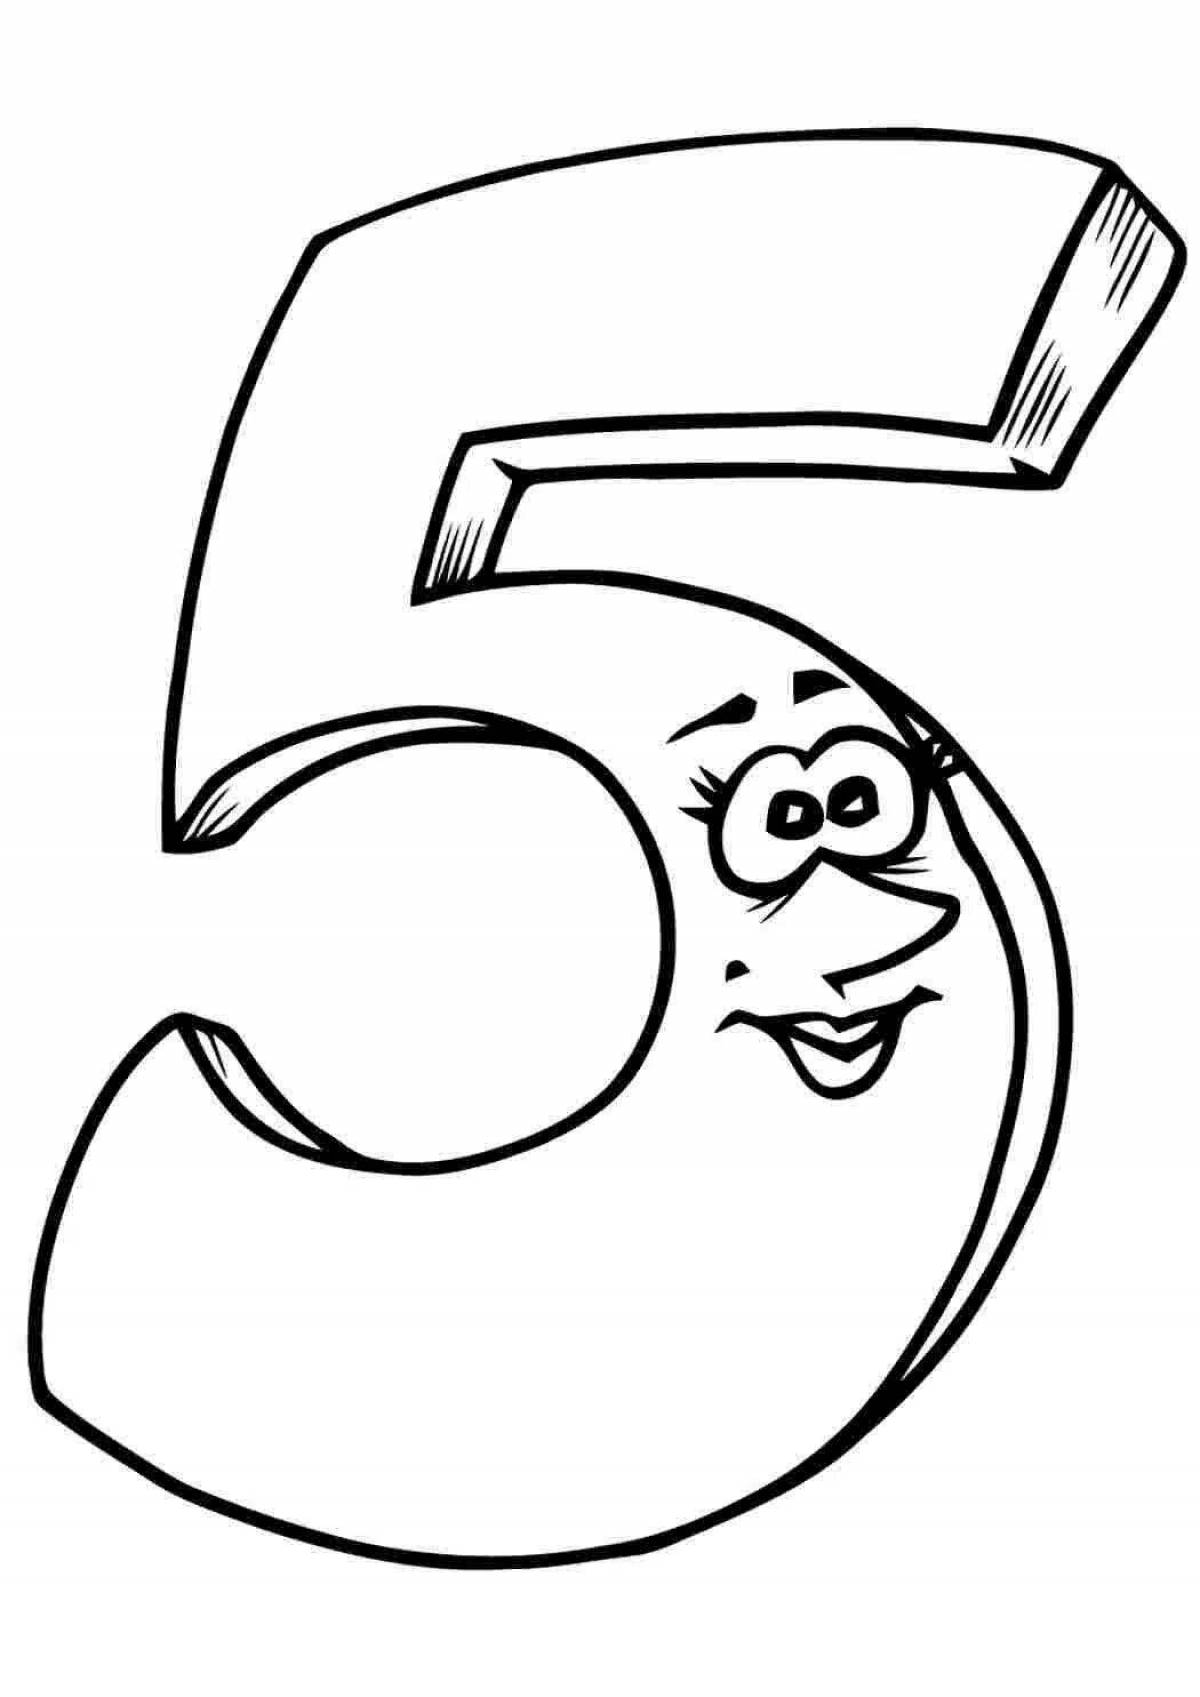 Fancy funny numbers coloring book